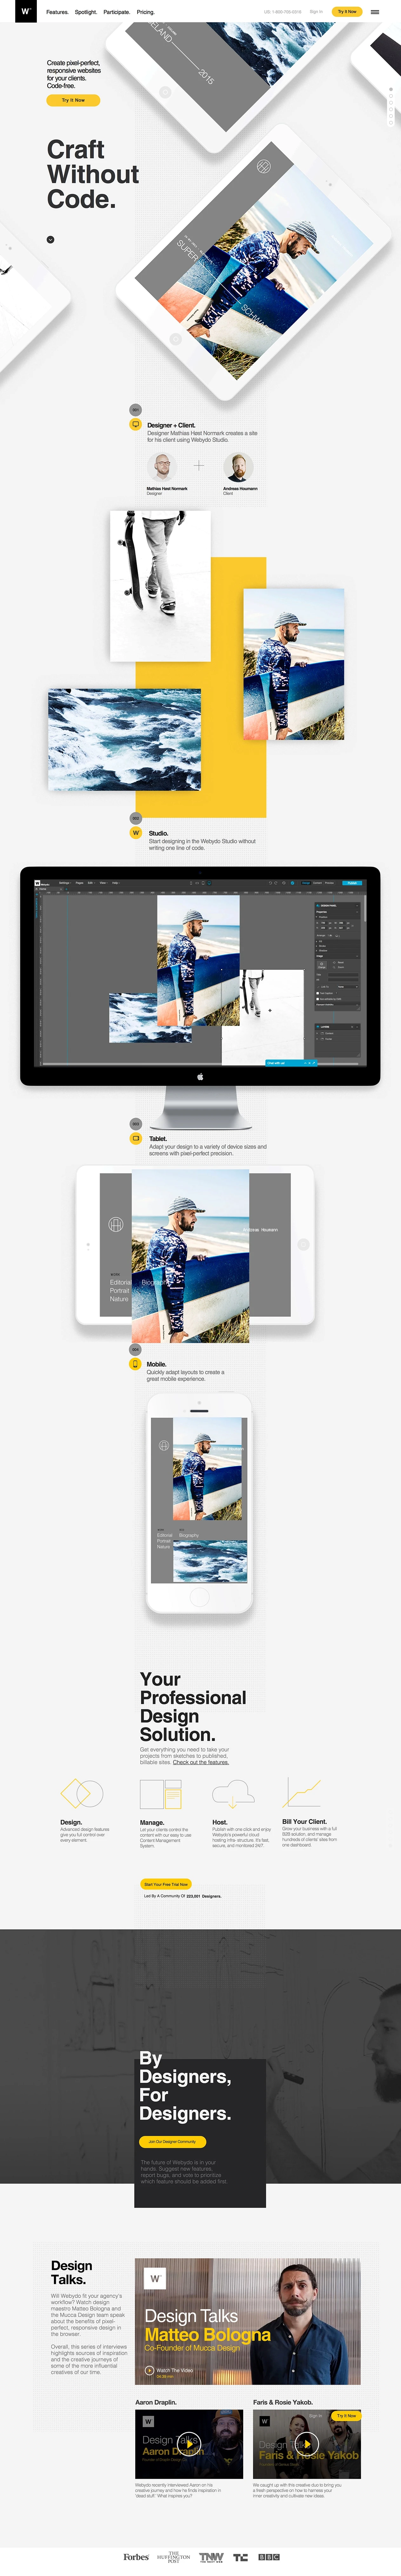 Webydo Landing Page Example: Webydo is a professional online website design software for designers. With Webydo, designers can create multiple responsive websites with custom tailored design from scratch without writing one line of code.